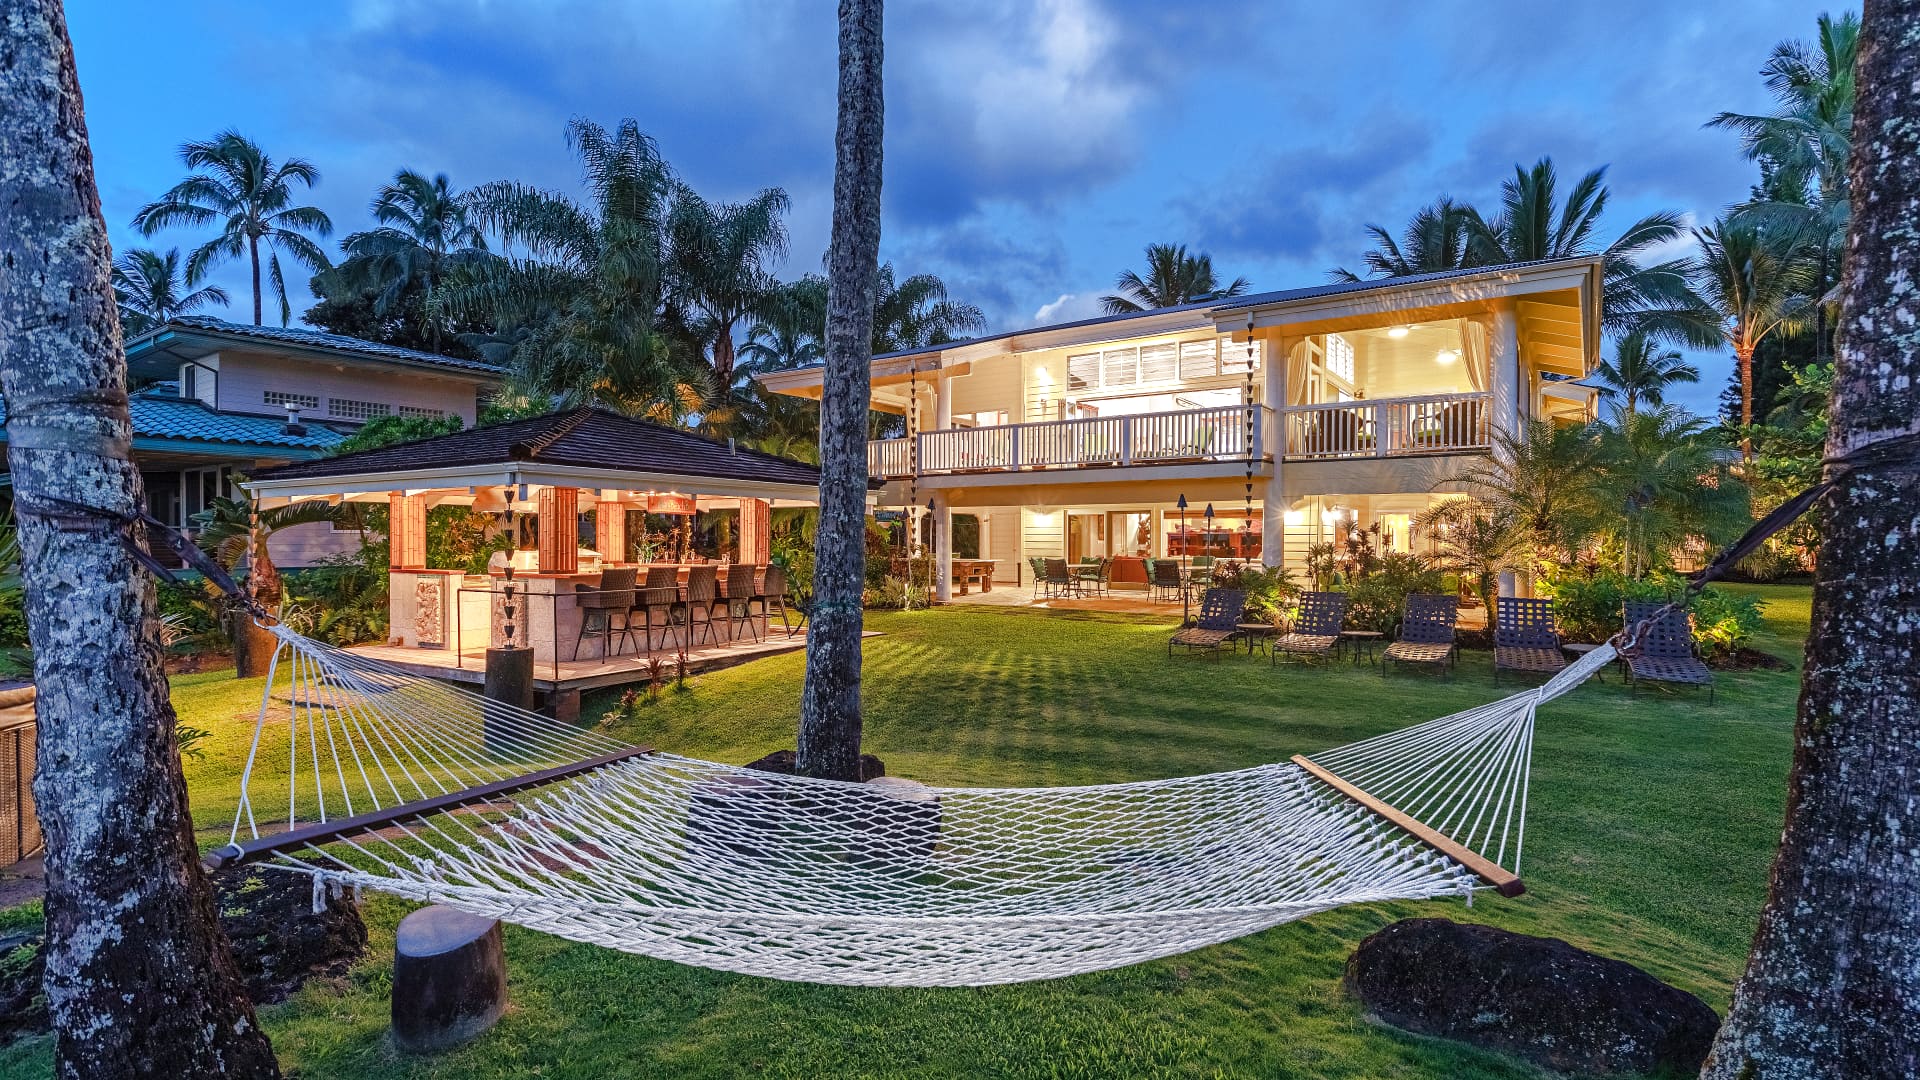 This 4,758-square-foot mansion in Kauai recently sold for $21 million.